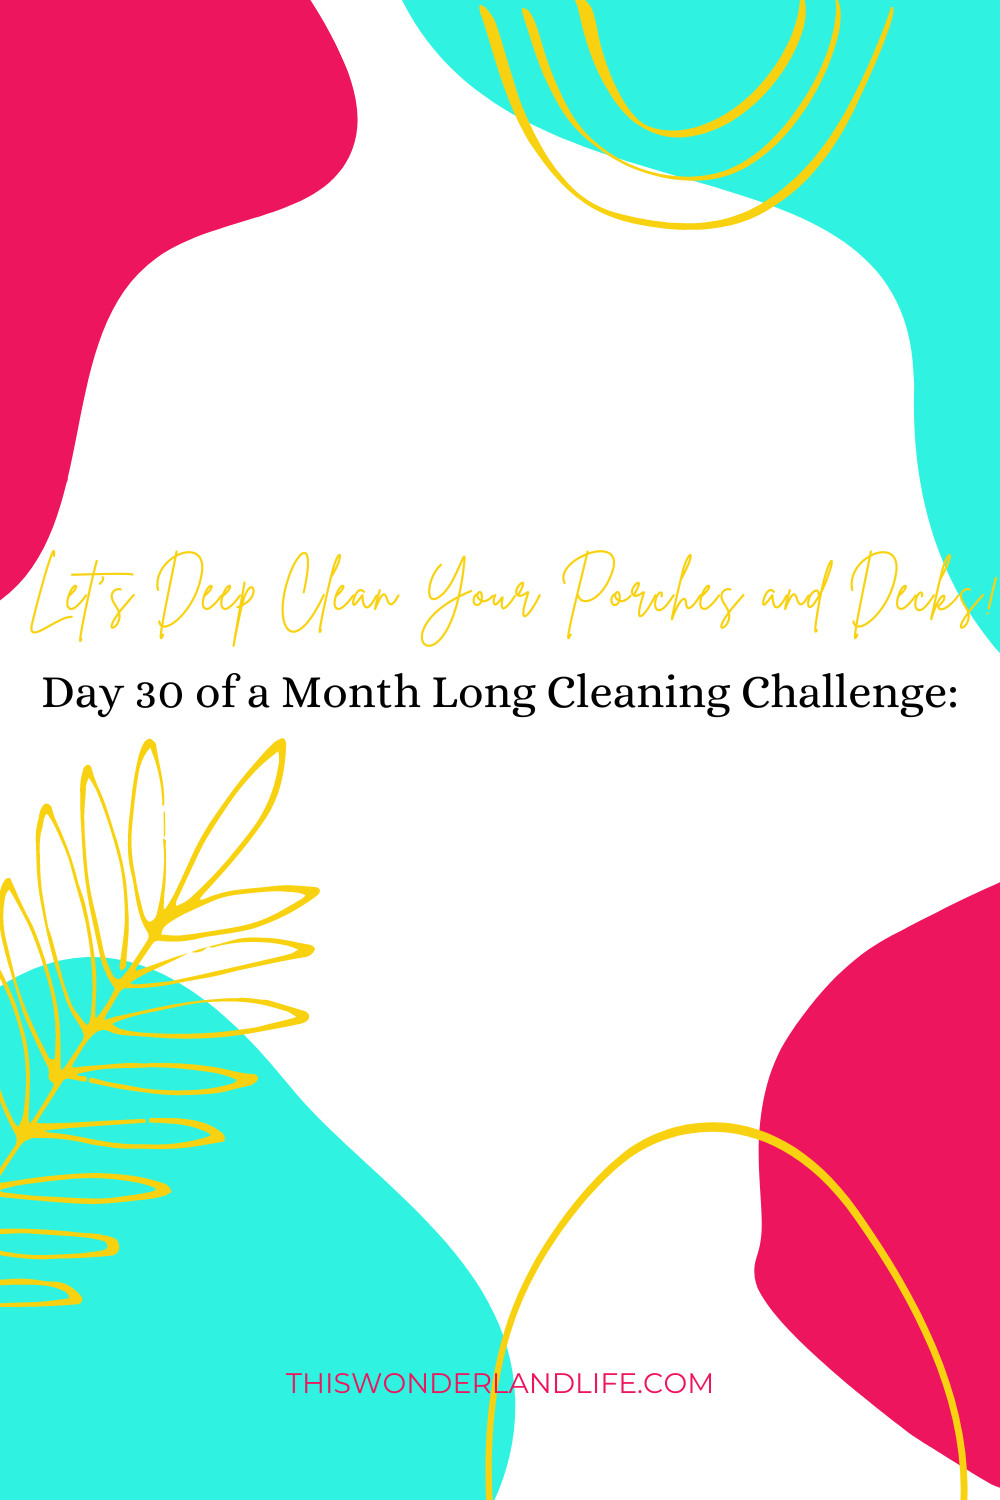 Day 30 of a Month Long Cleaning Challenge: Let's Deep Clean Your Porches and Decks!